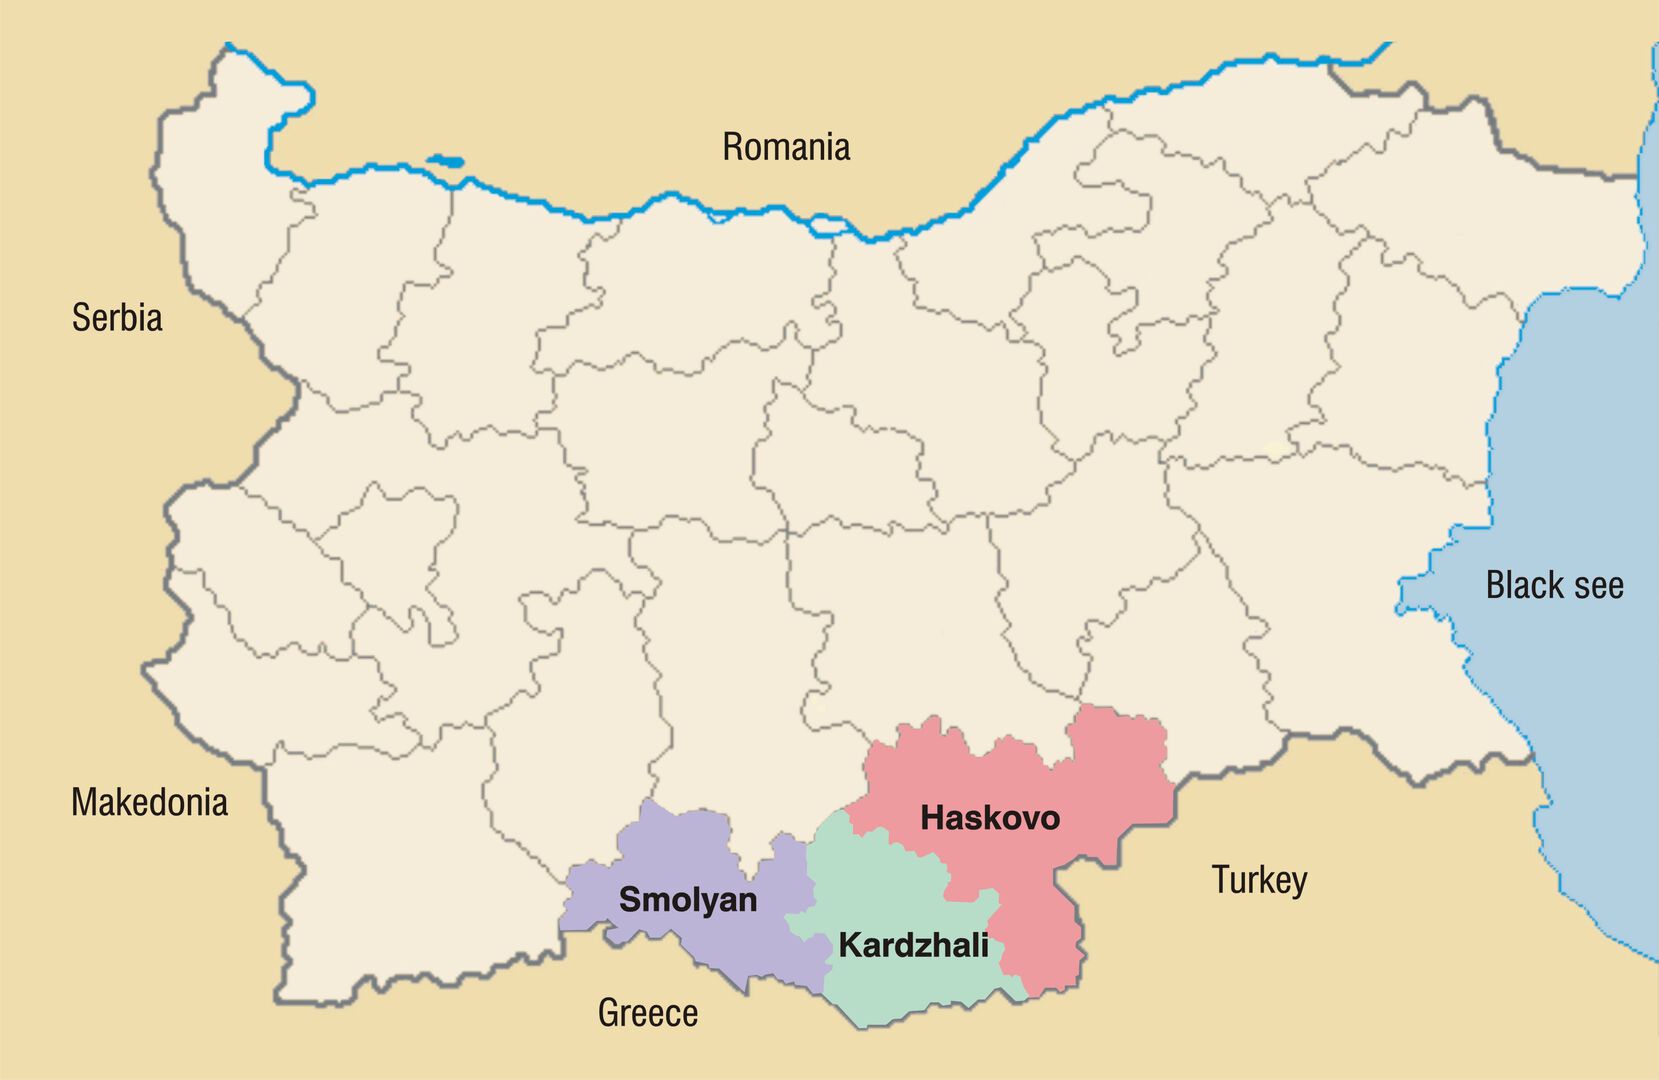 FIRST PORTABLE ULTRASOUND BASED SCREENING STUDY IN BULGARIA ON THE PREVALENCE OF CYSTIC ECHINOCOCCOSIS IN KARDZHALI DISTRICT